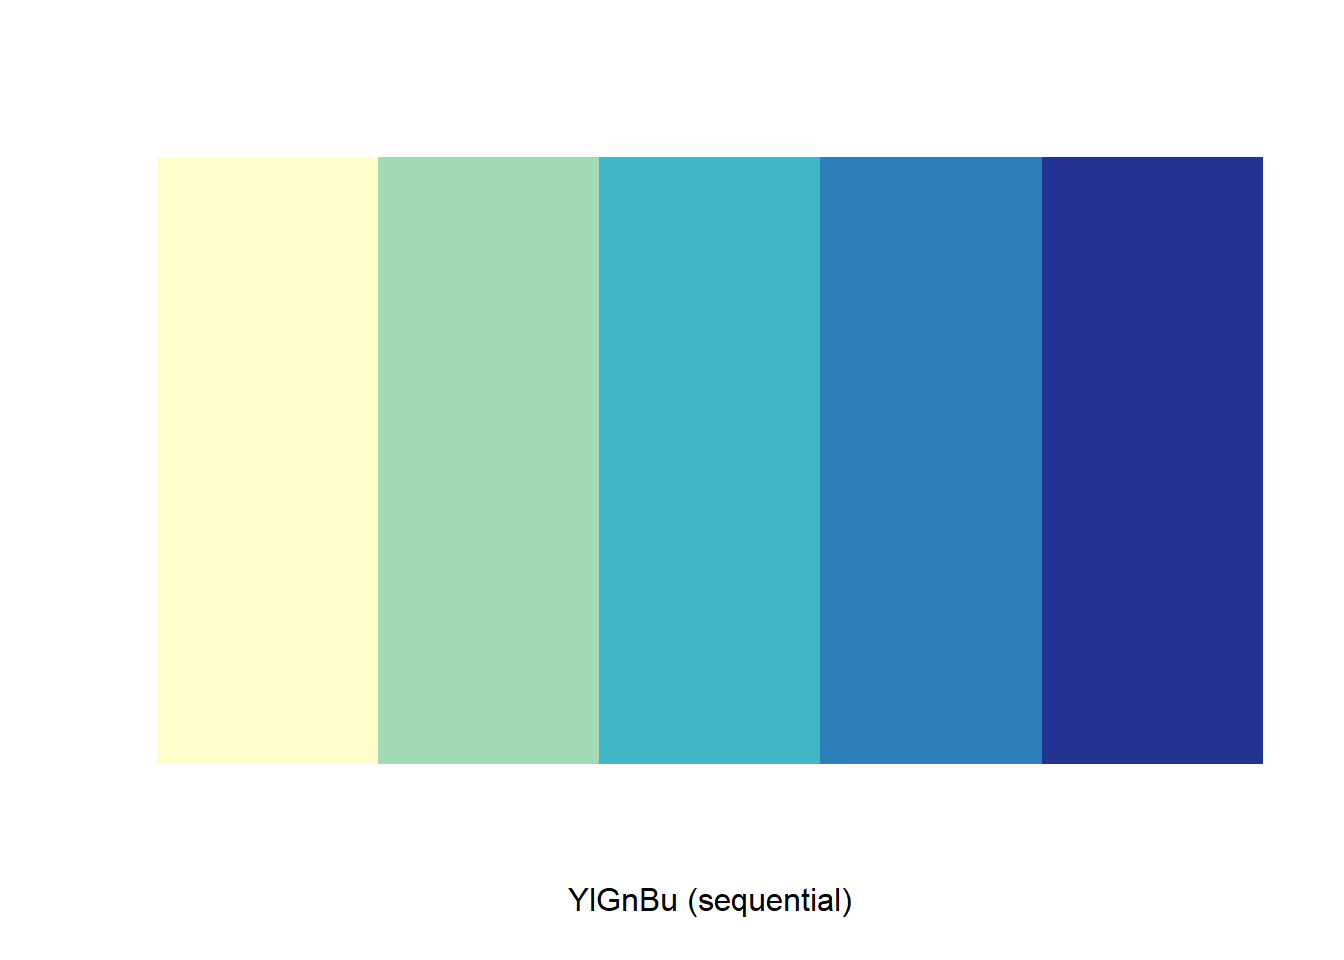 The ColorBrewer yellow-green-blue color palette with five categories.